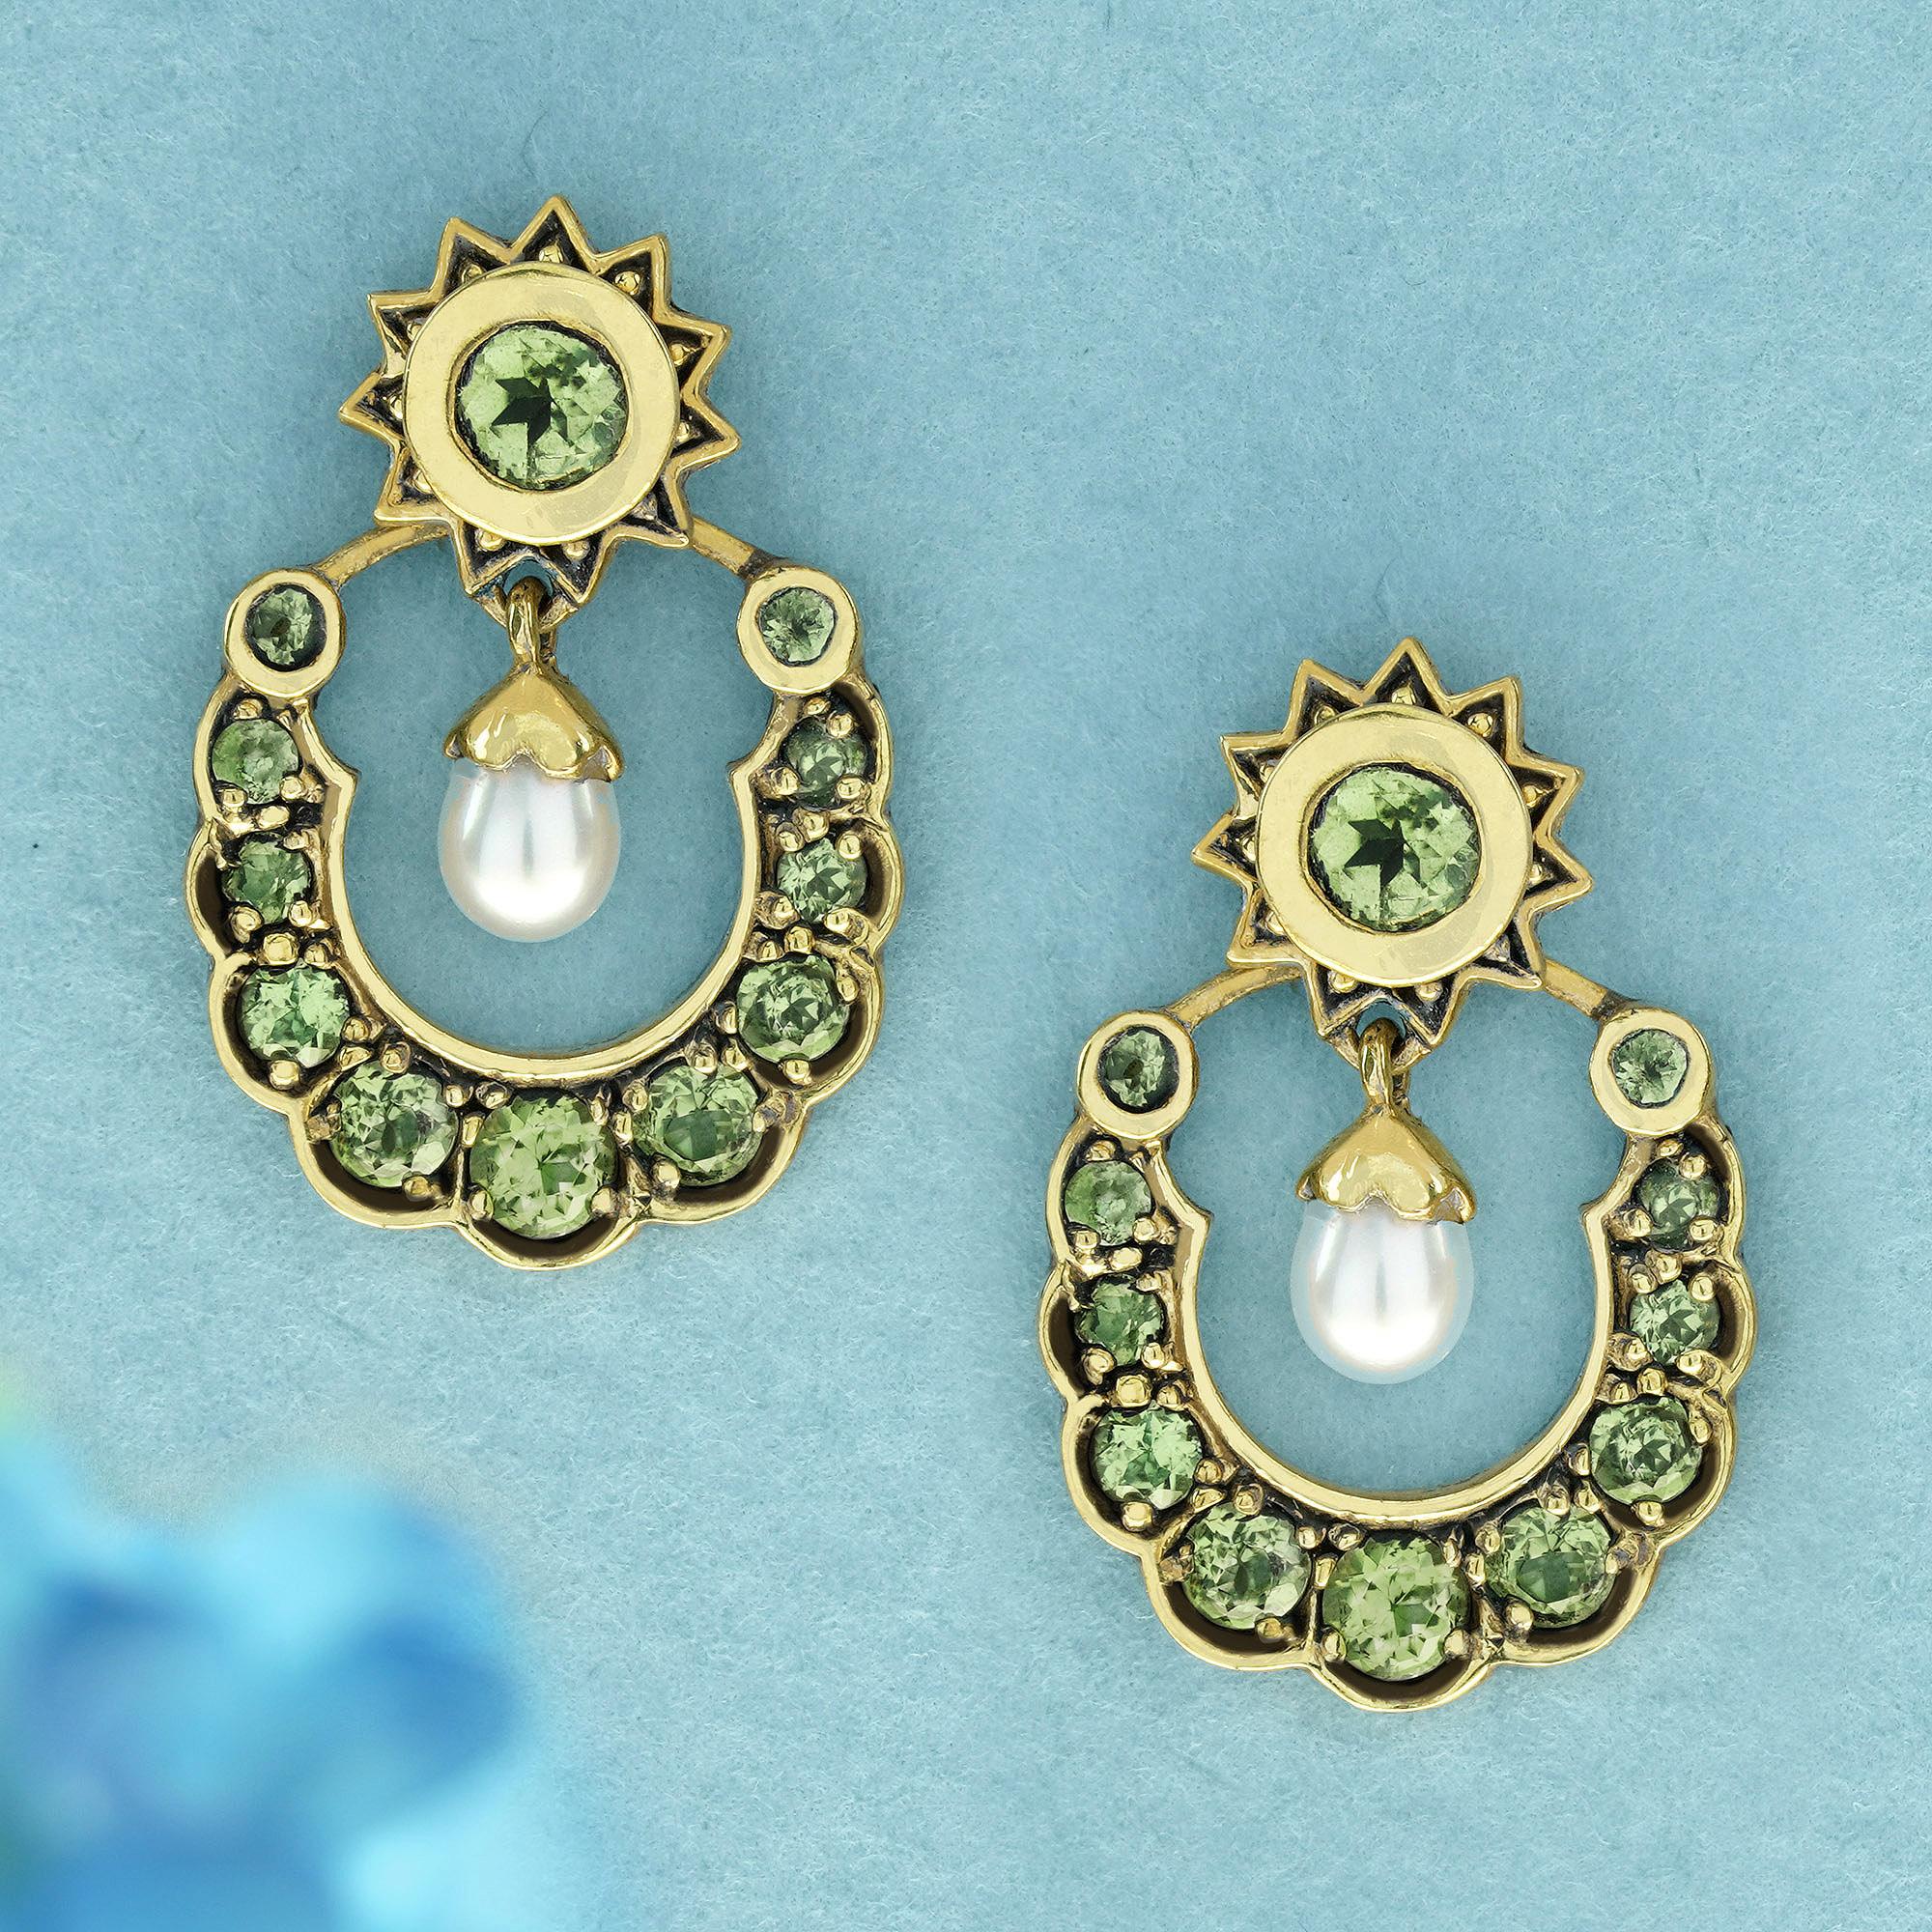  Crafted from yellow gold, this graceful vintage-inspired drop earrings showcase a verdant, a round white pearl in a striking trillion shape, serving as the centerpiece of the pieces . Encircling the pearls are round lime green peridots delicately